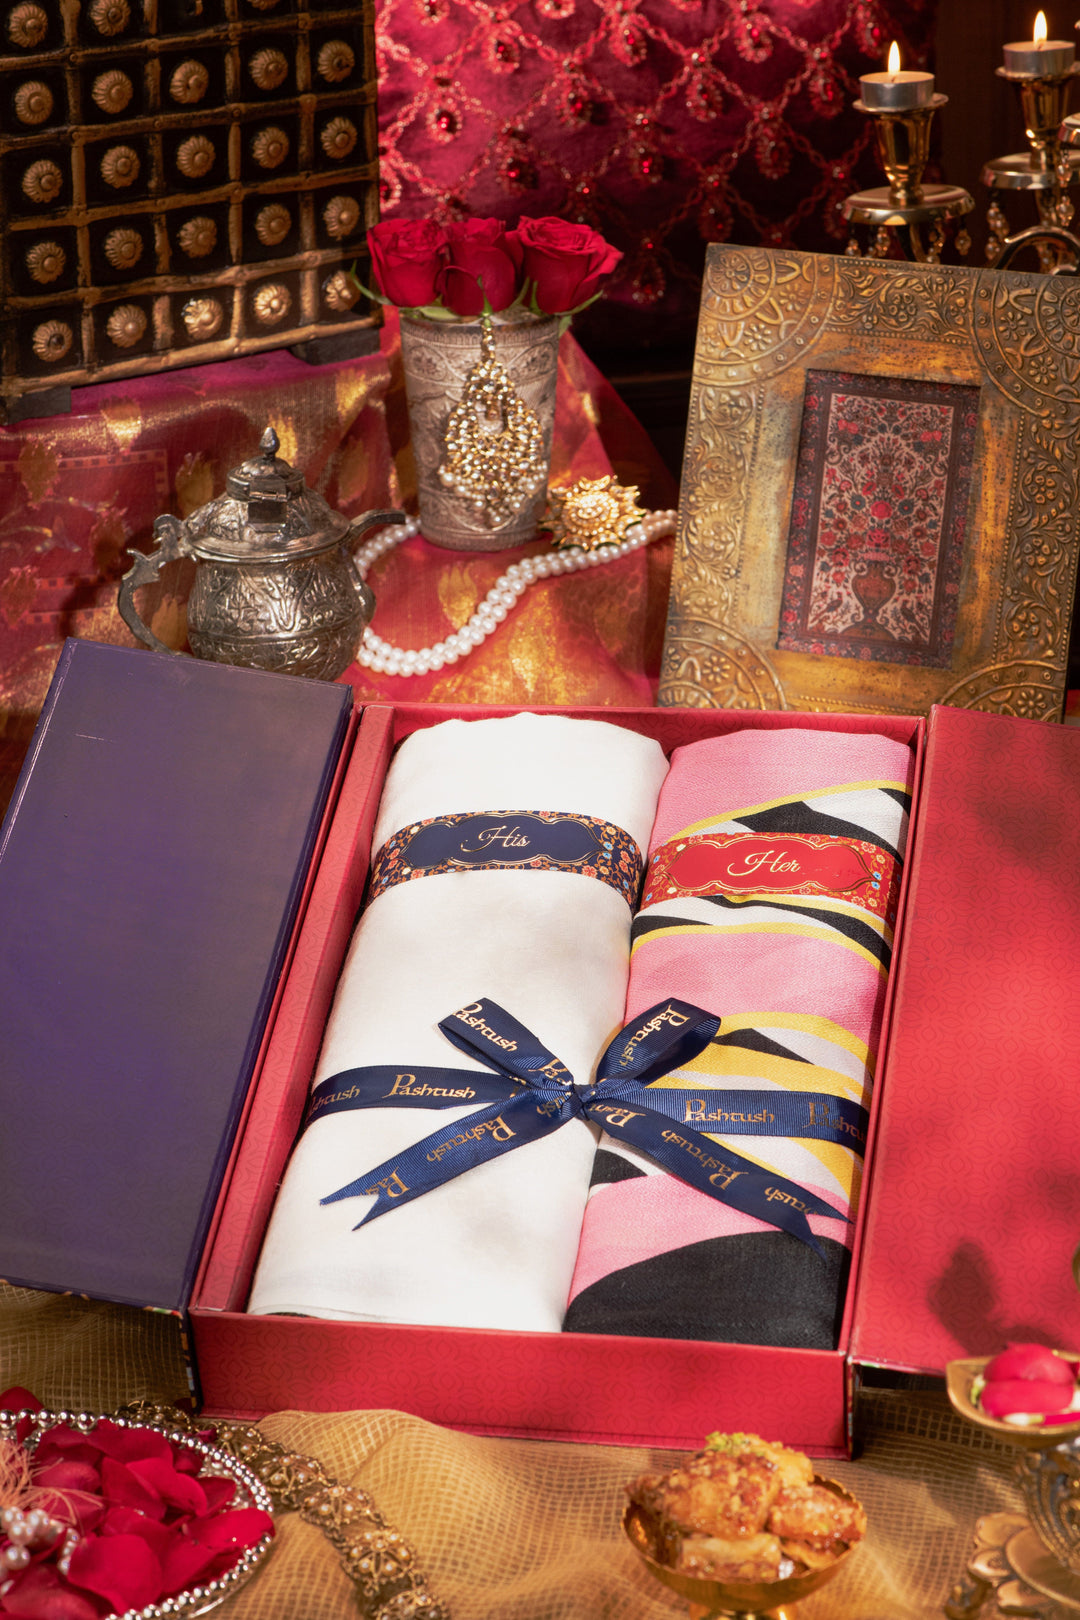 Pashtush India Gift Pack Pashtush His And Her Set Of Fine Wool and Printed Bamboo Stoles With Premium Gift Box Packaging, Ivory and Multicolour